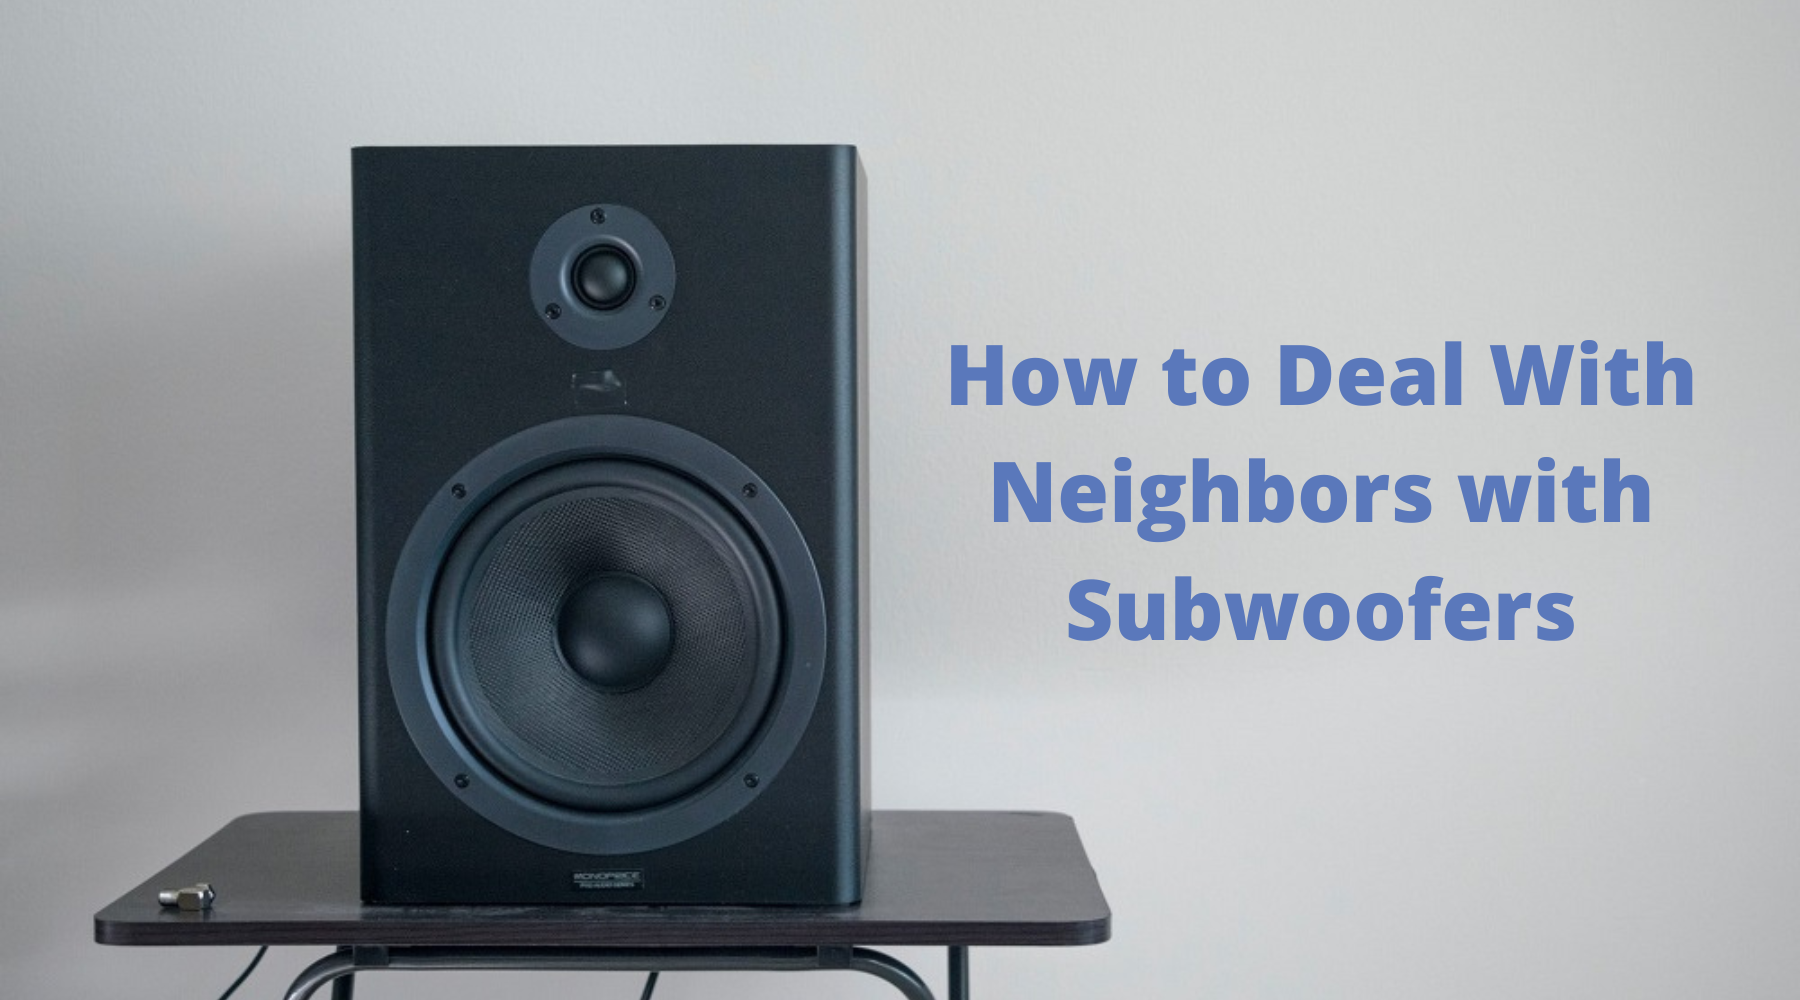 How to Deal With Neighbors with Subwoofers